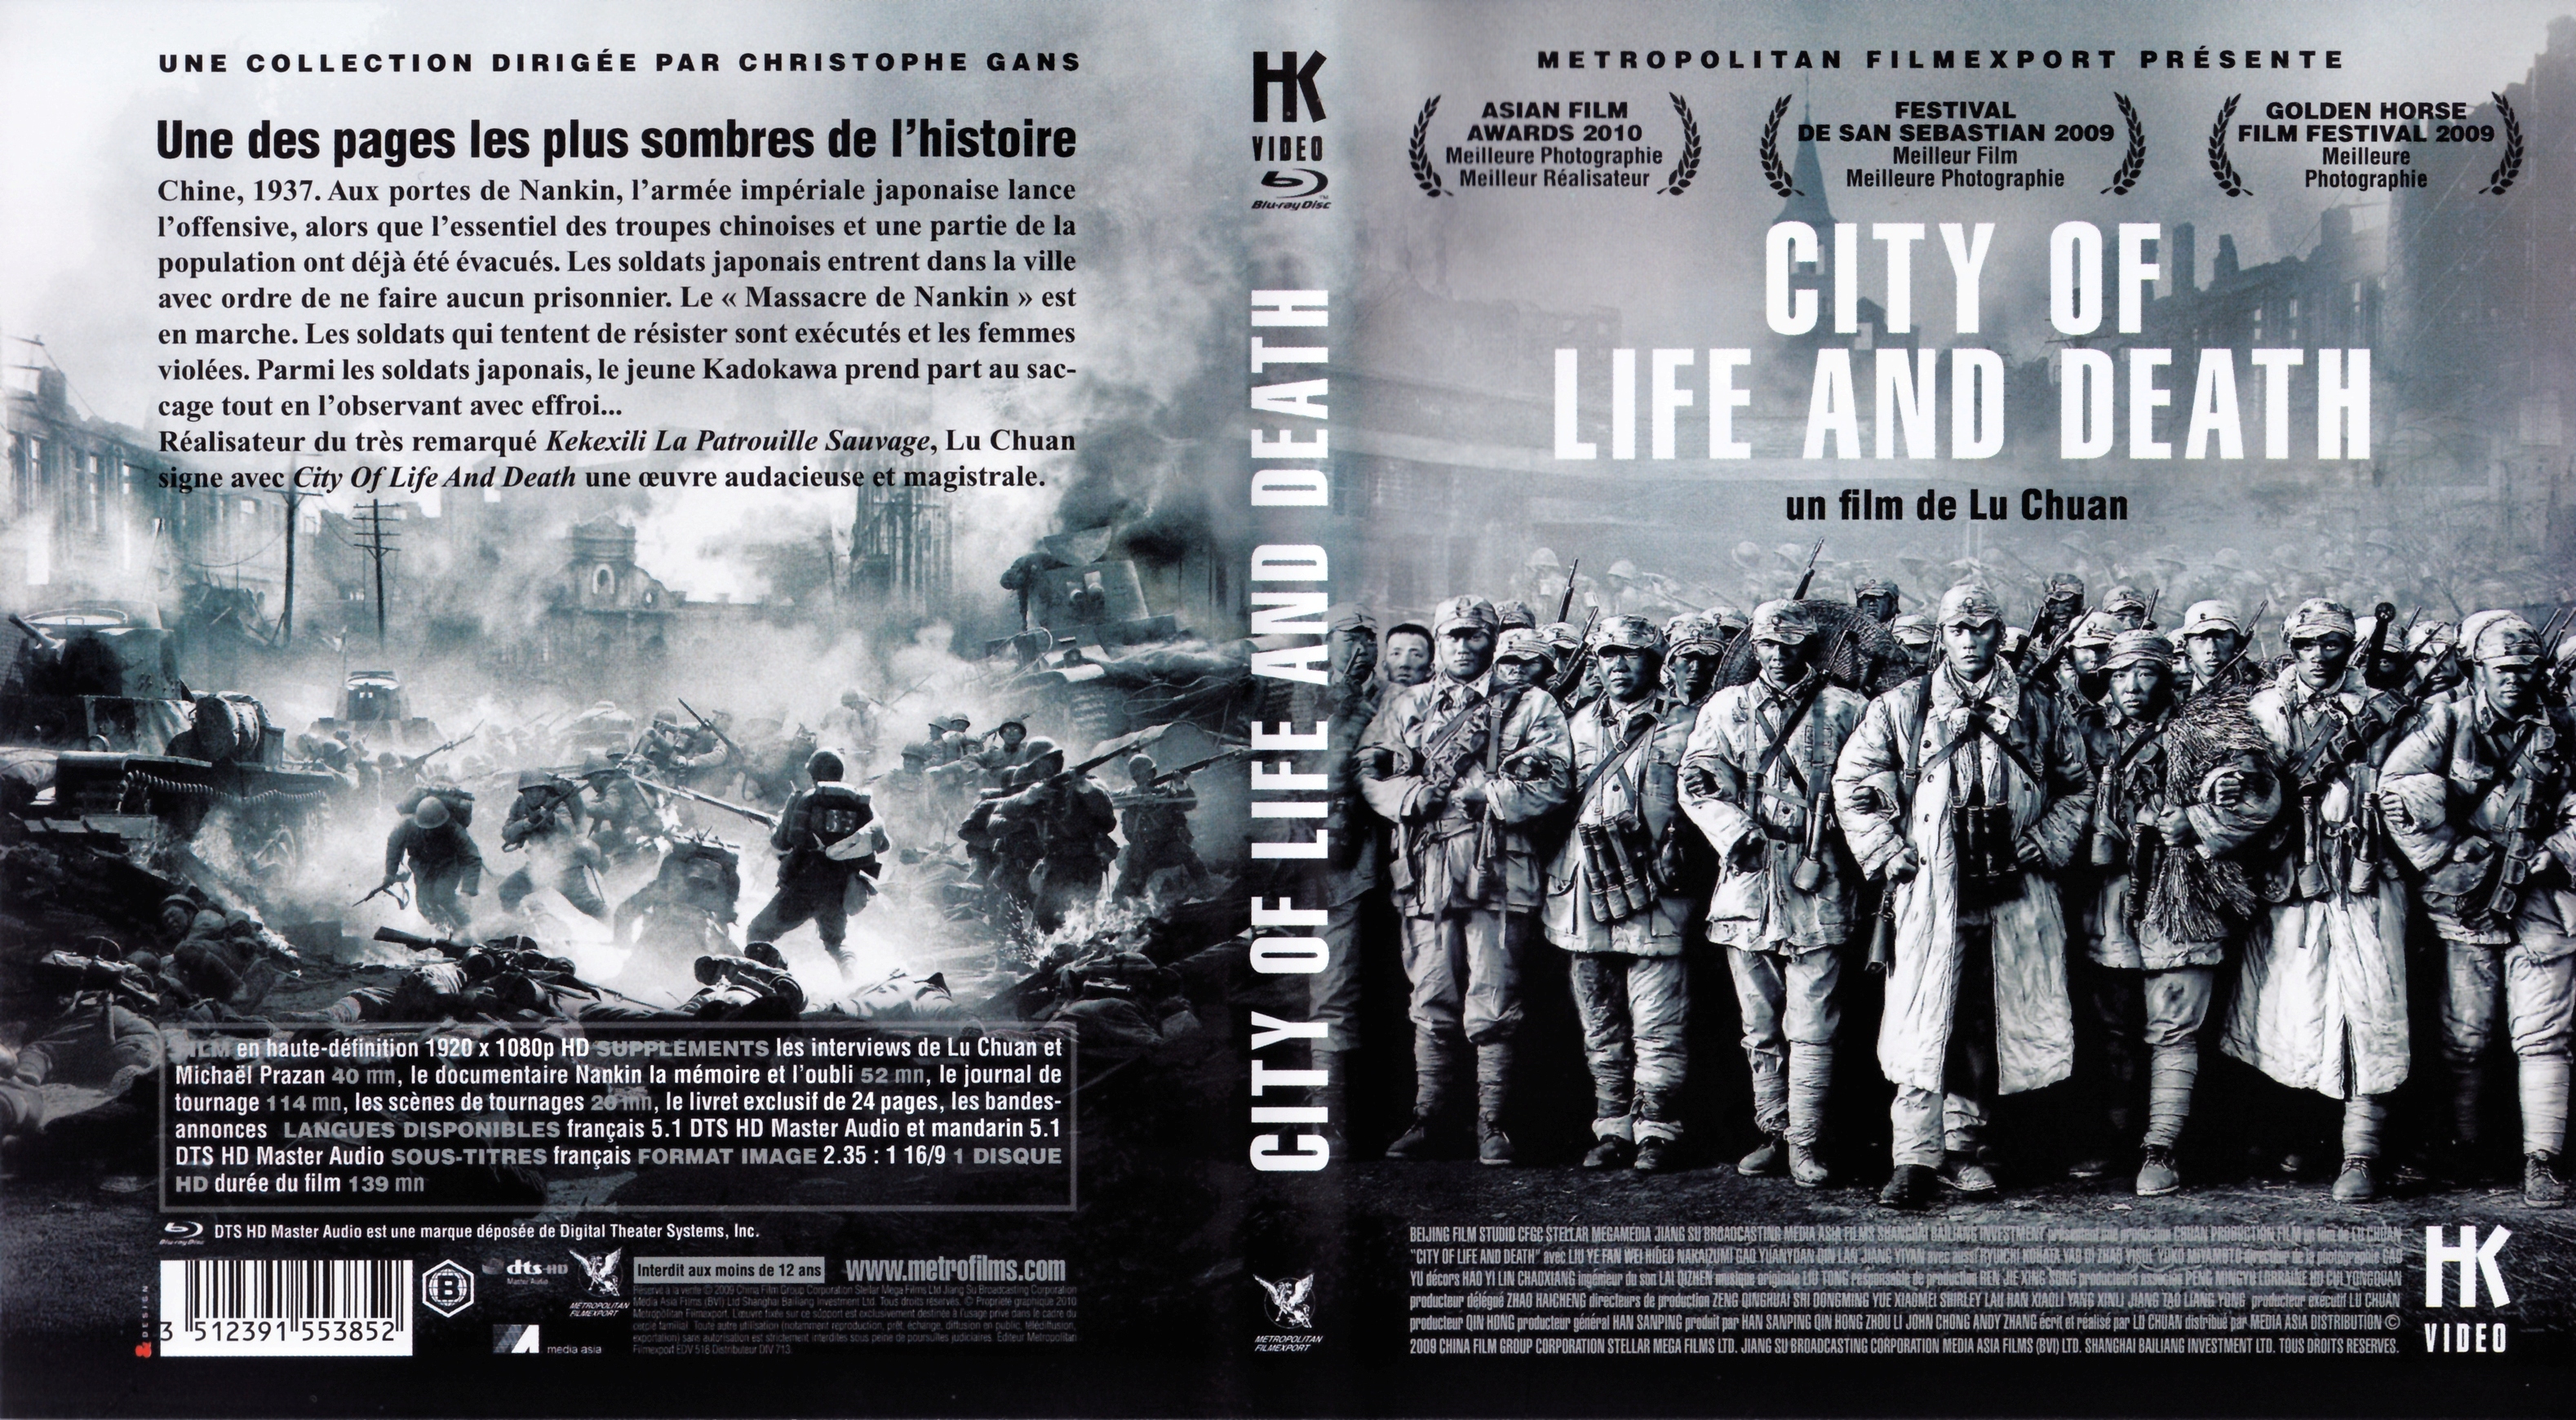 Jaquette DVD City of Life and Death (BLU-RAY)